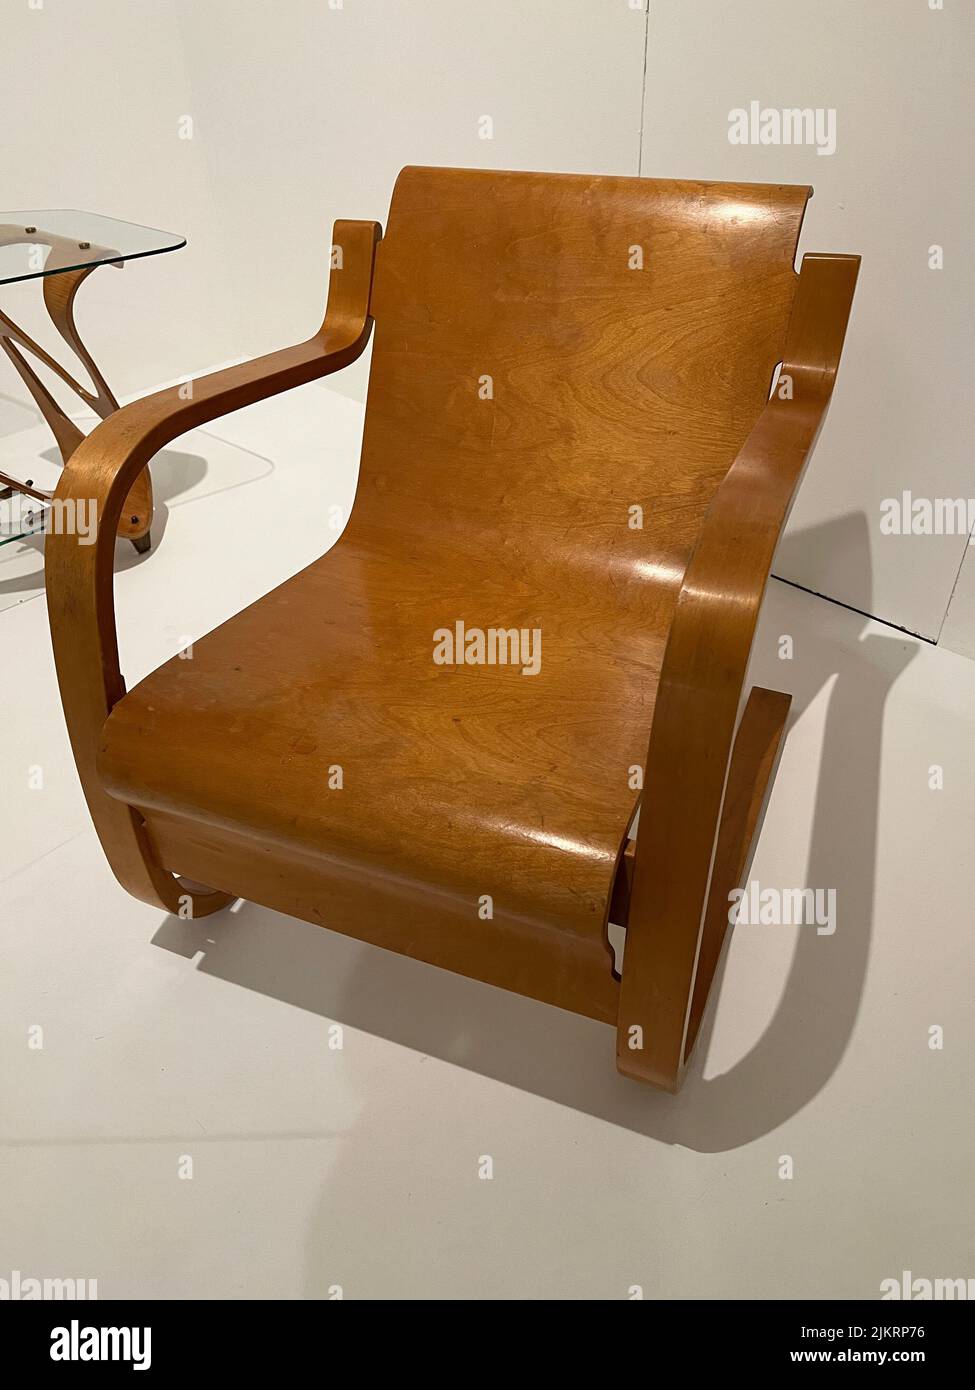 The Finnish designer Alvar Aalto created the Model 31 Chair, formed from a single sheet of molded plywood.Though it was already being used in the nineteenth century, molded plywood-sheets of wood veneer laminated with glue and formed under heat and pressure-became ubiquitous in the mid-twentieth century as a relatively affordable means of producing, and democratizing, 'good design.' Many of the leading designers of the period experimented with the material to create some of their most iconic works. In the early 1930s. Stock Photo